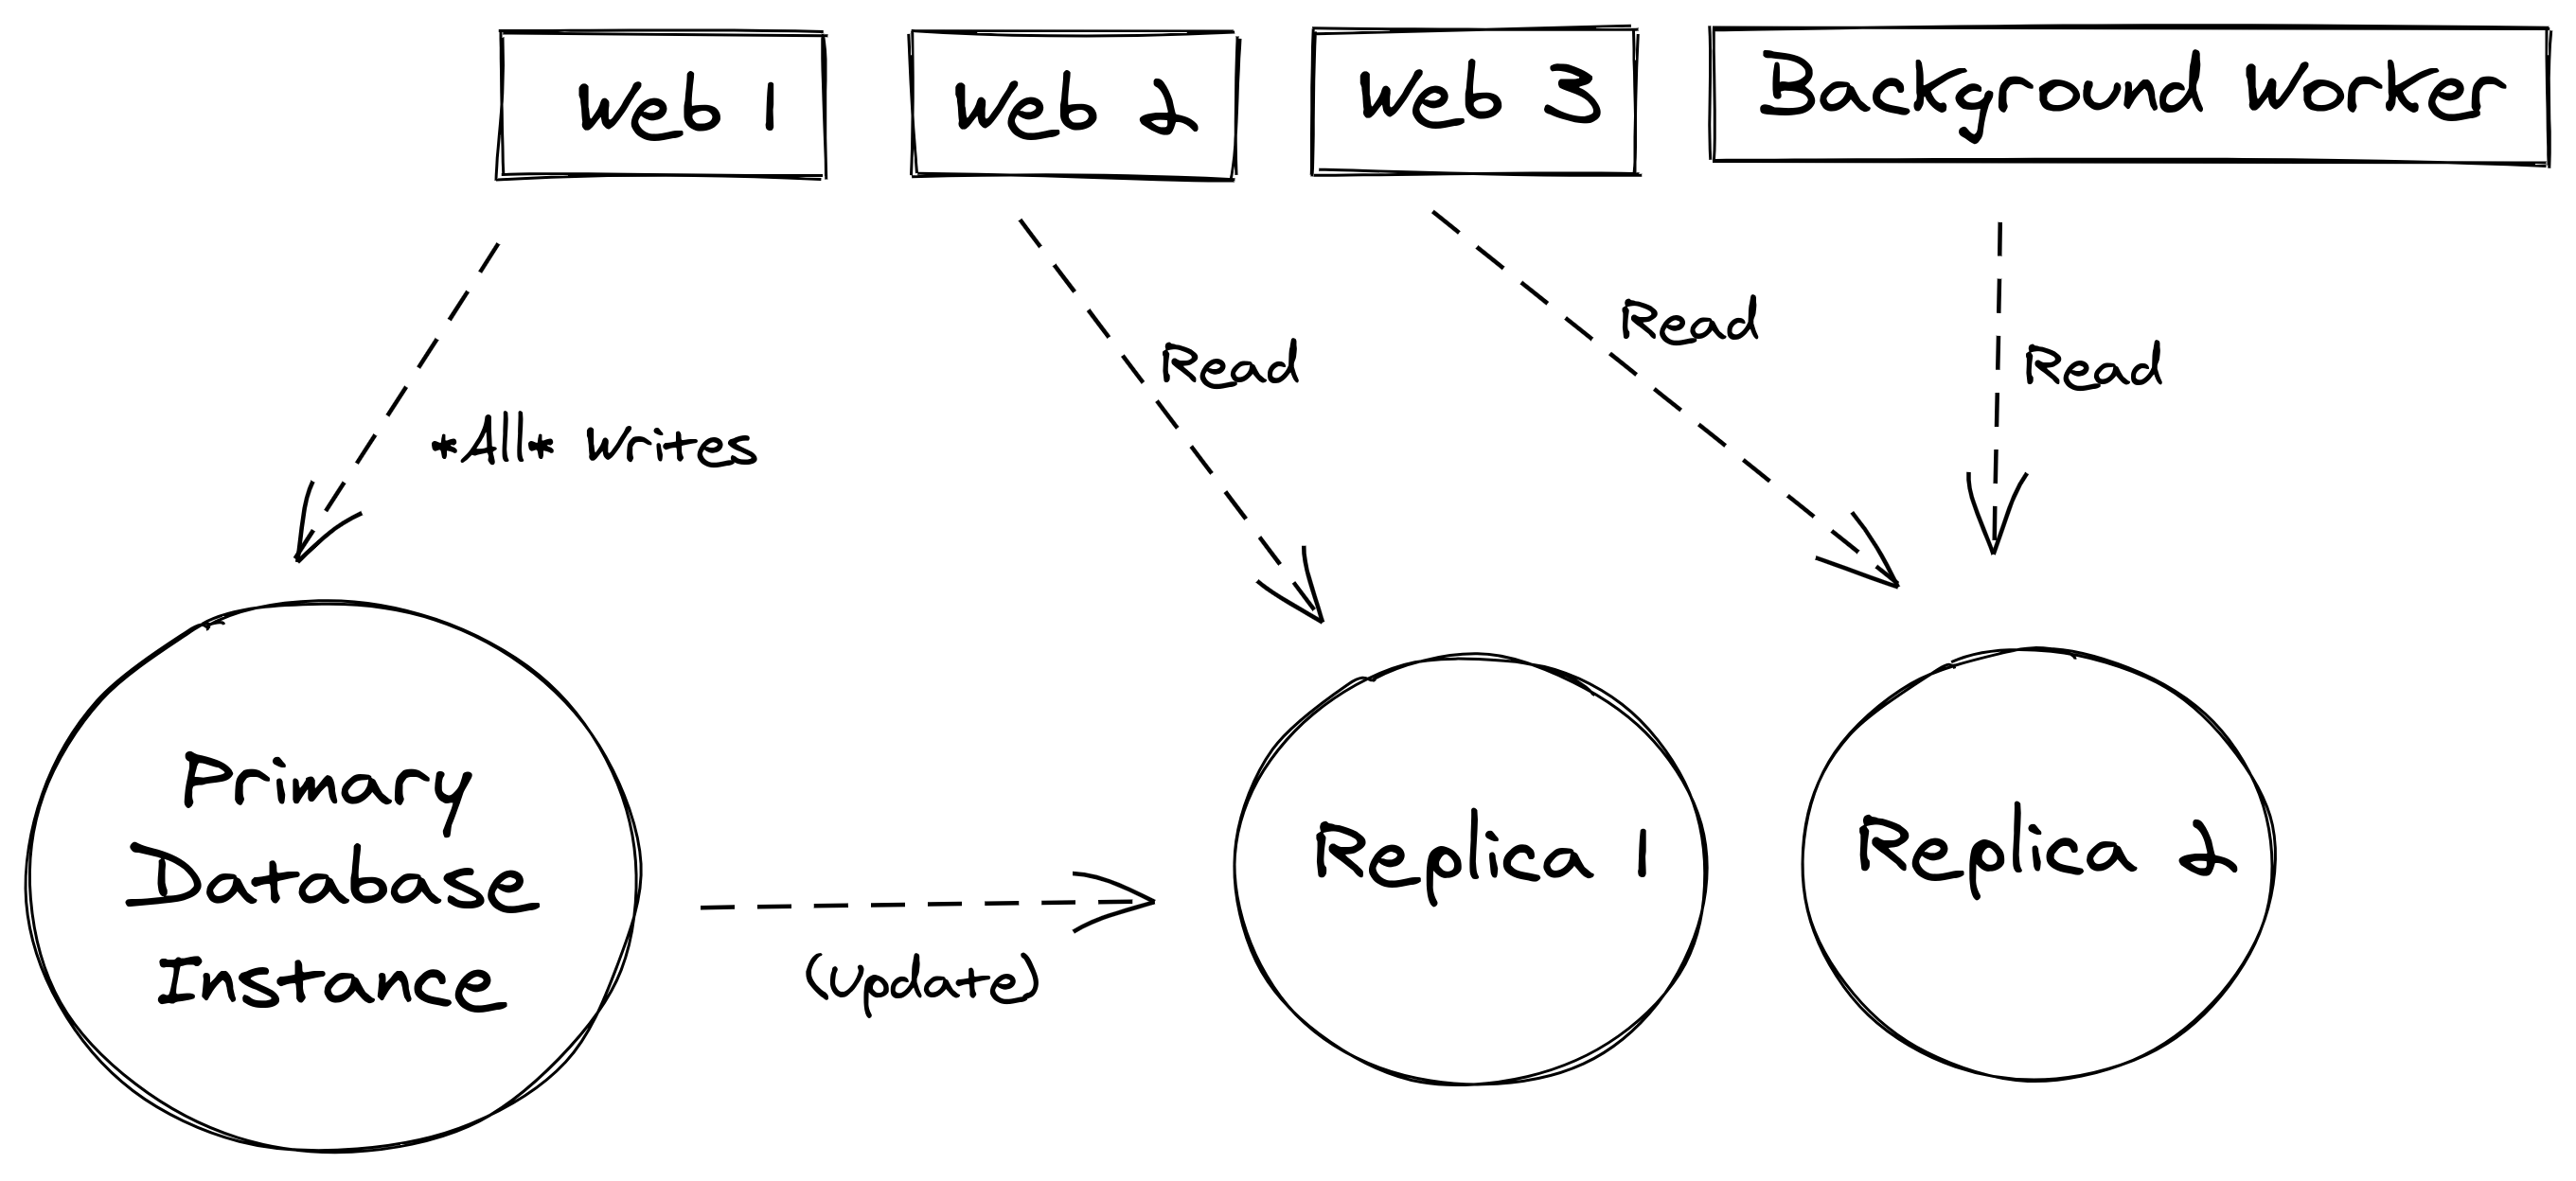 Read replicas reduce load on primary database instance